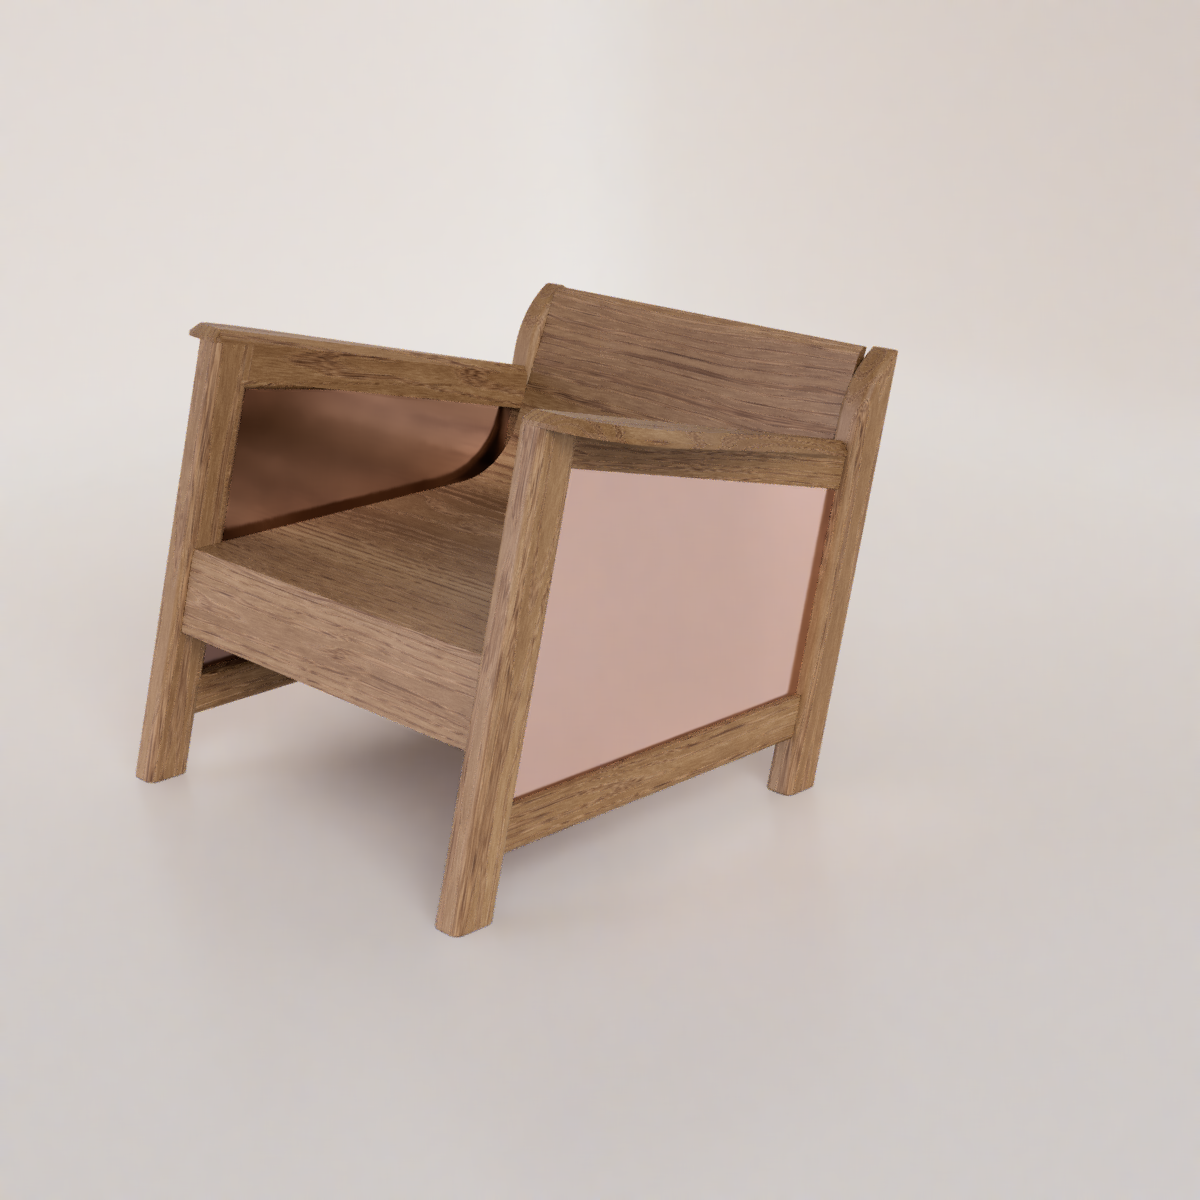 The Reading Chair - PROTO